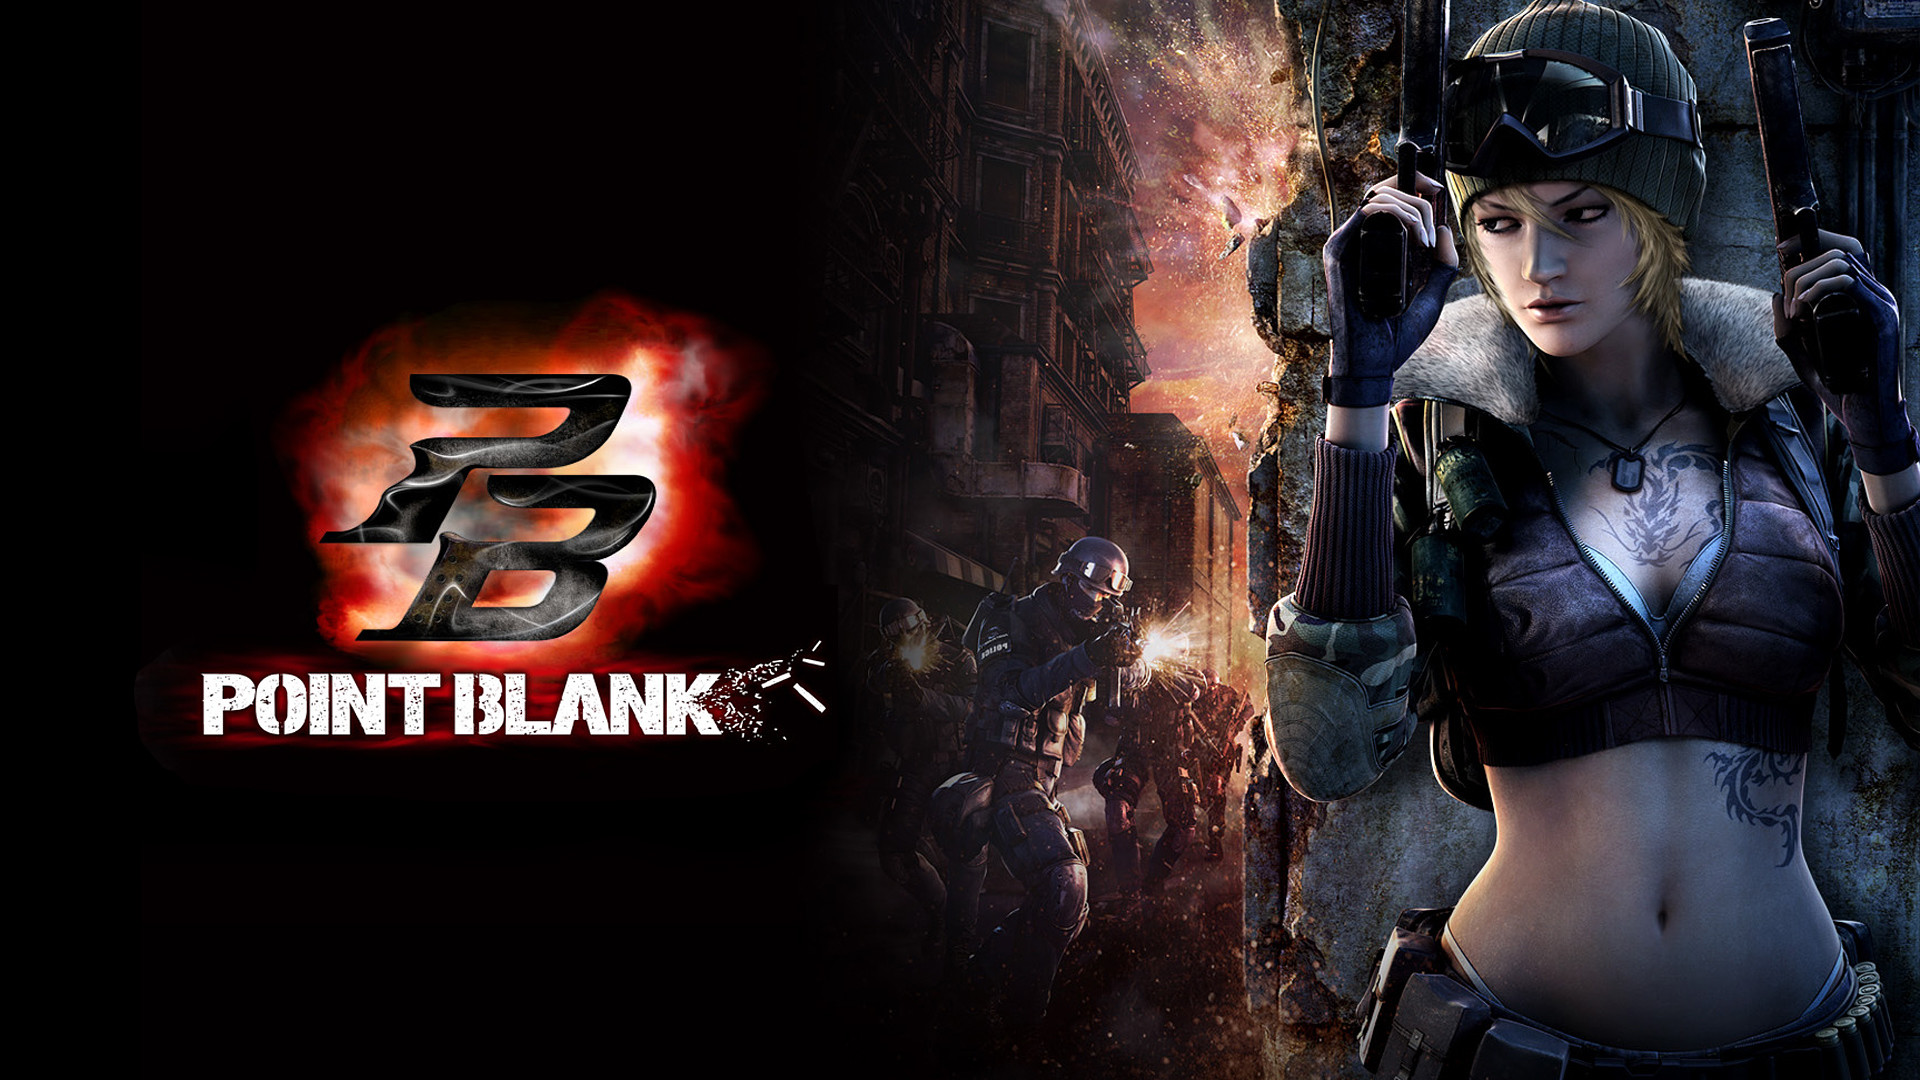 1920x1080 Point Blank Wallpapers 2015 - Wallpaper Cave